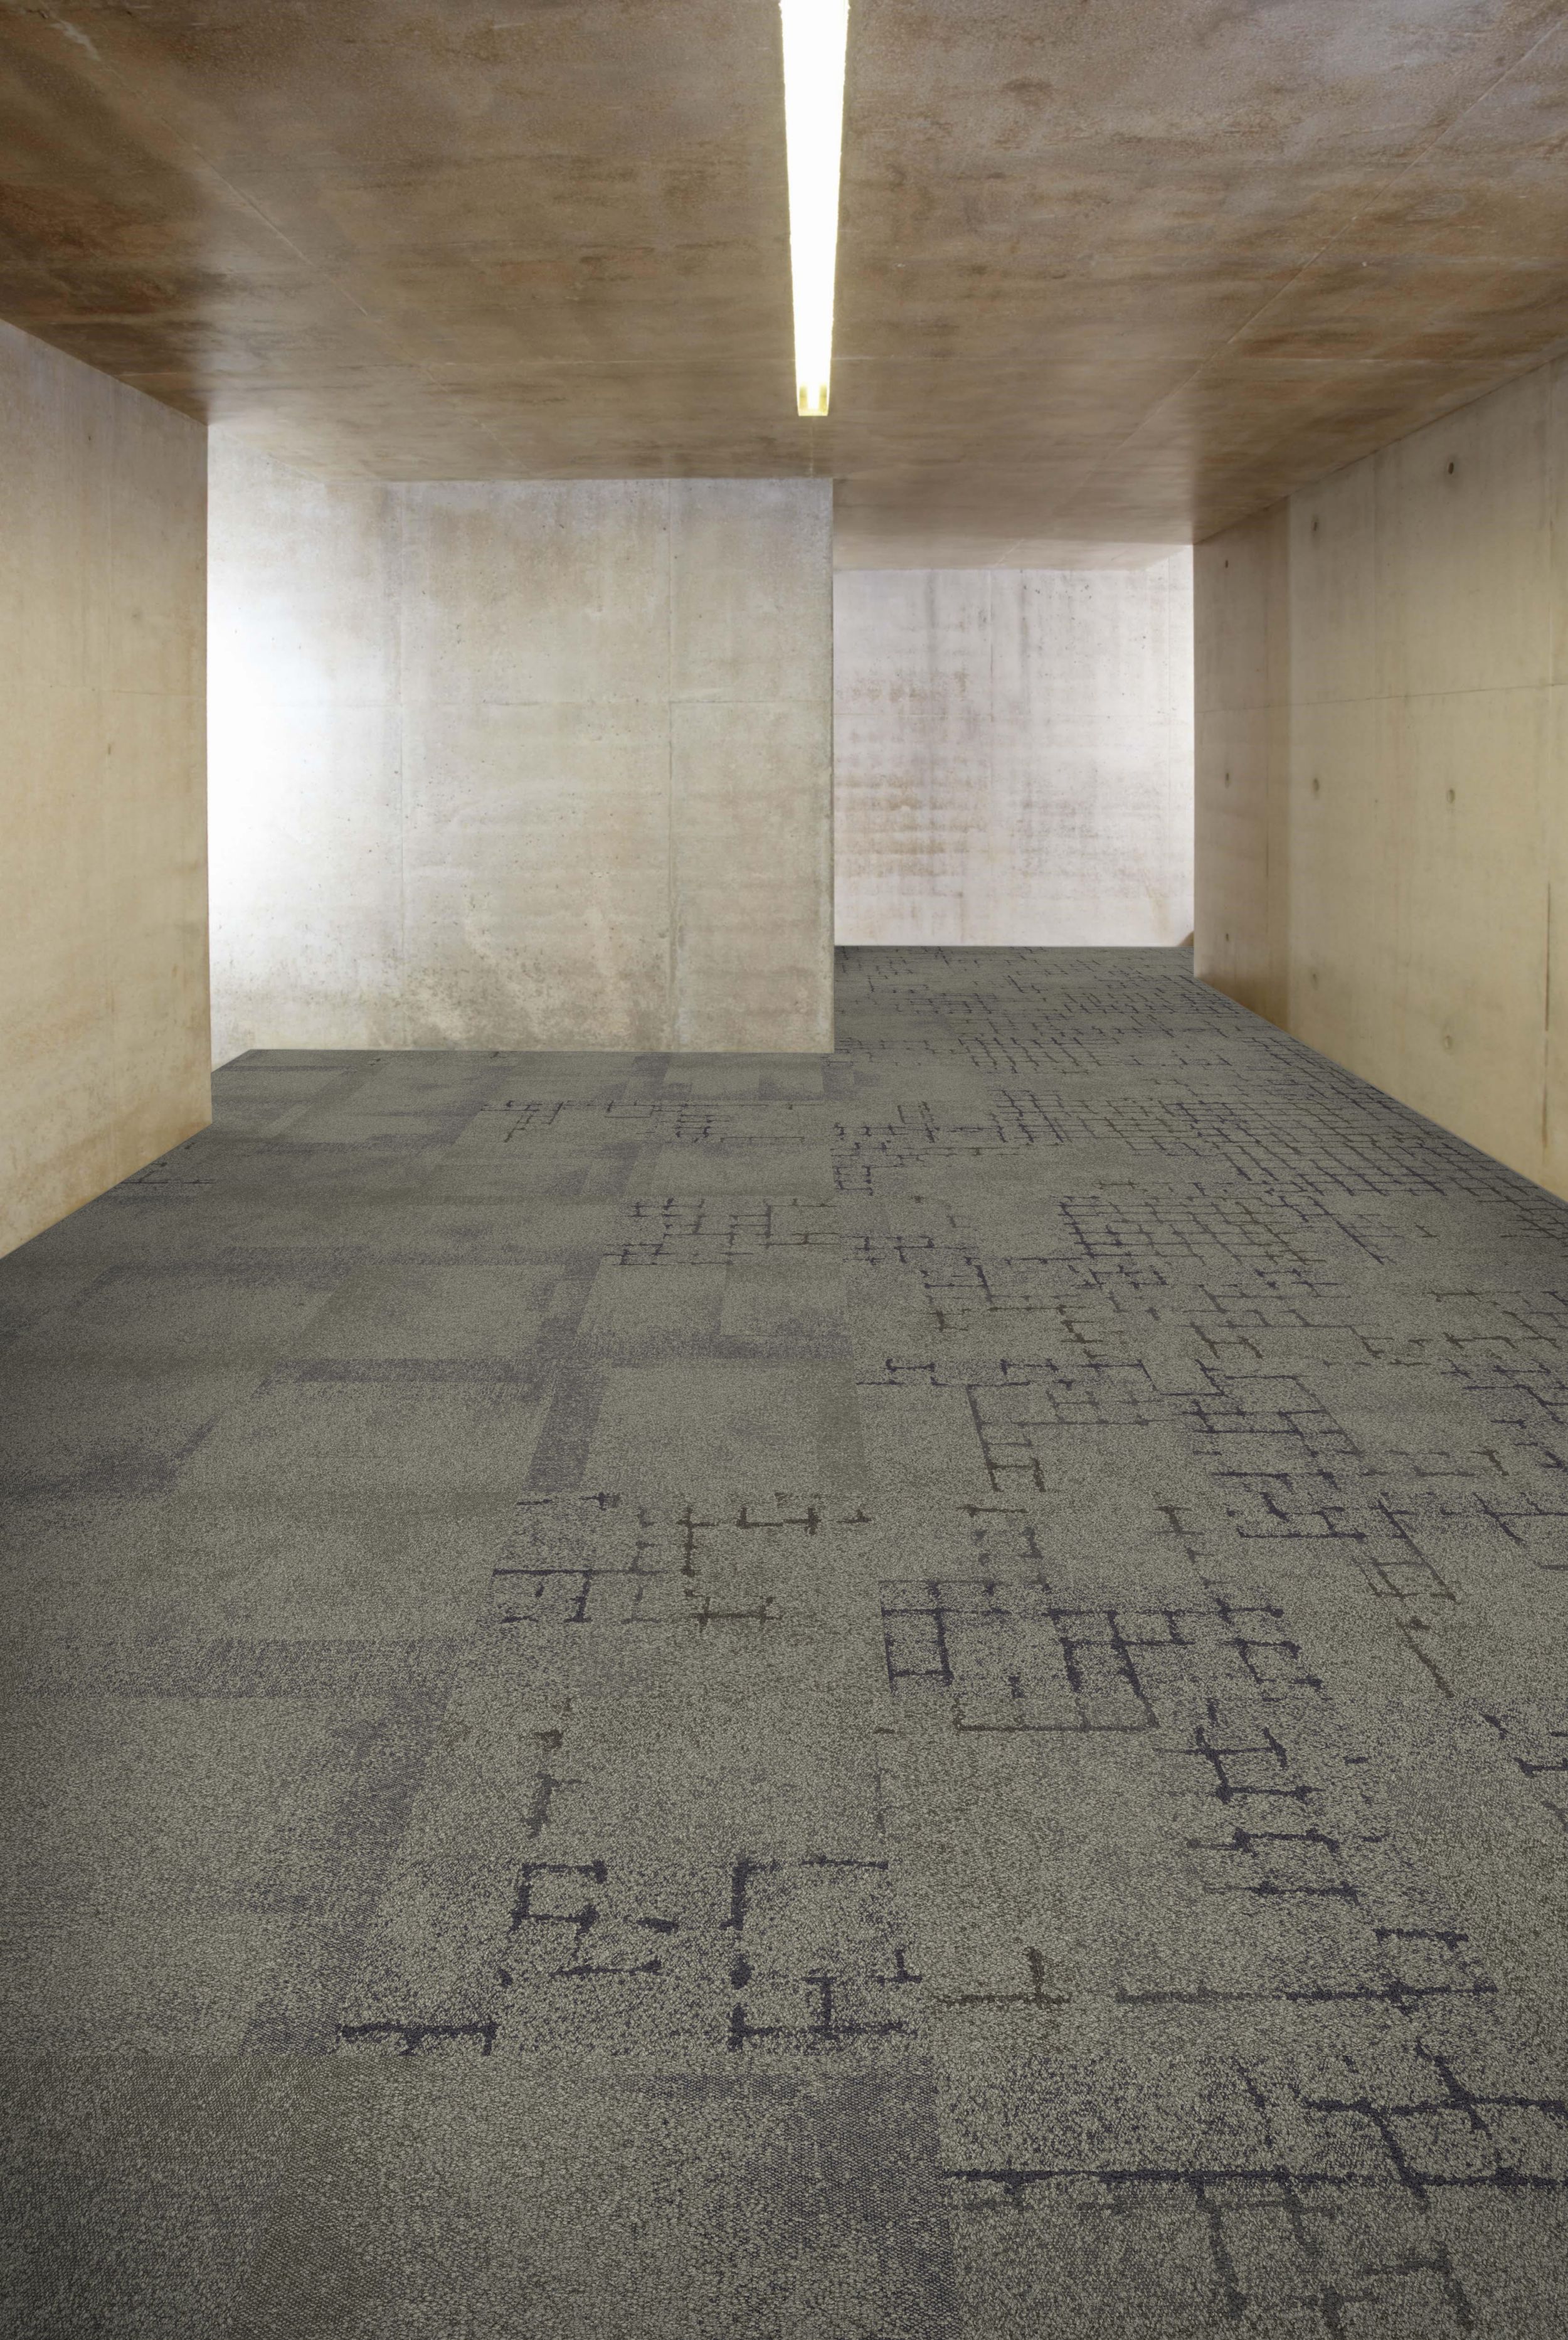 Interface Flagstone, Kerbstone and Sett in Stone carpet tile in corridor with concrete walls and ceiling Bildnummer 2